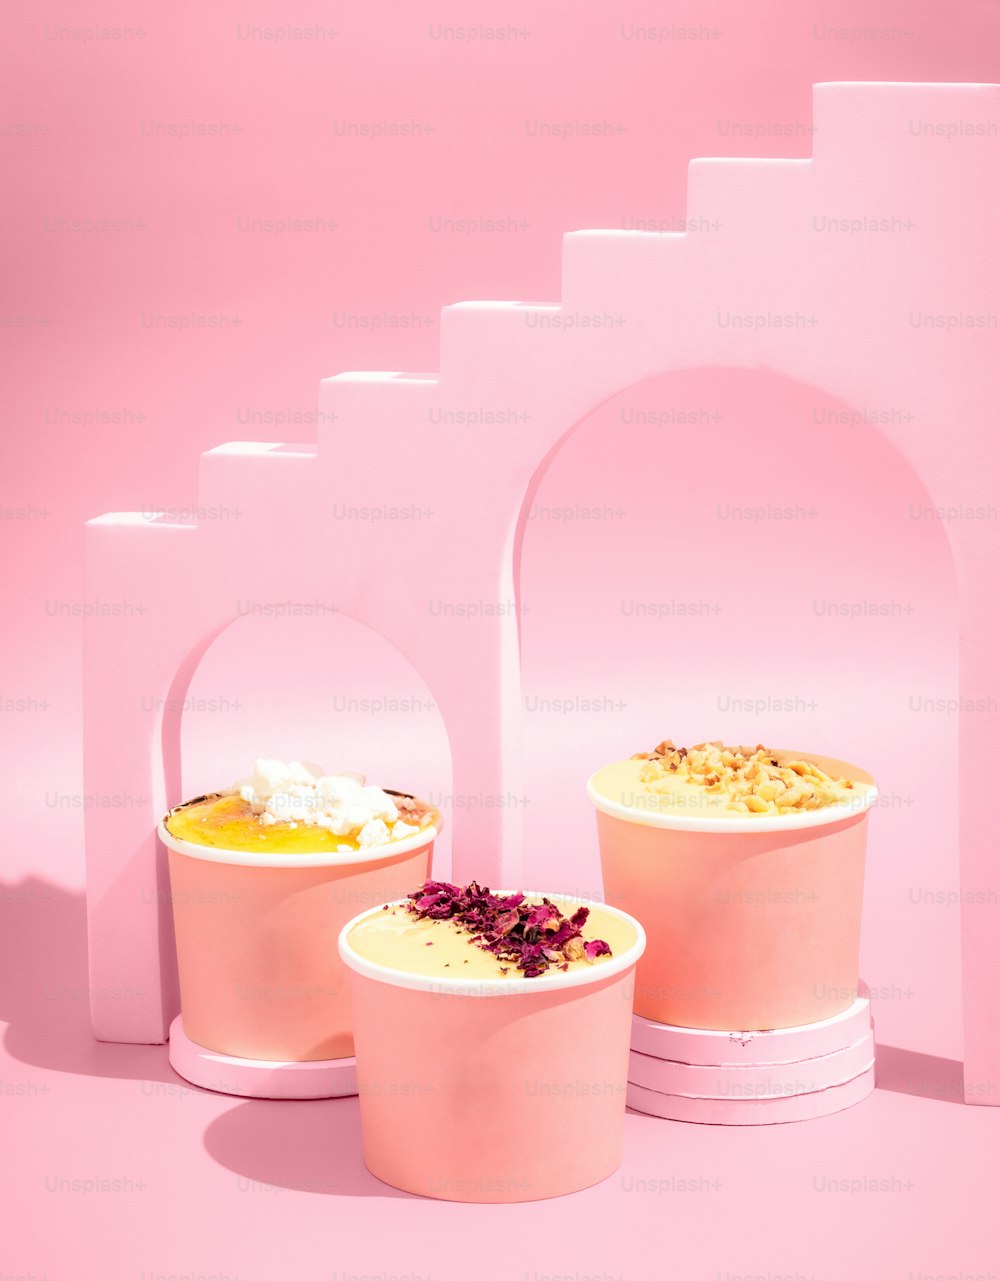 three ice cream containers with flowers in them